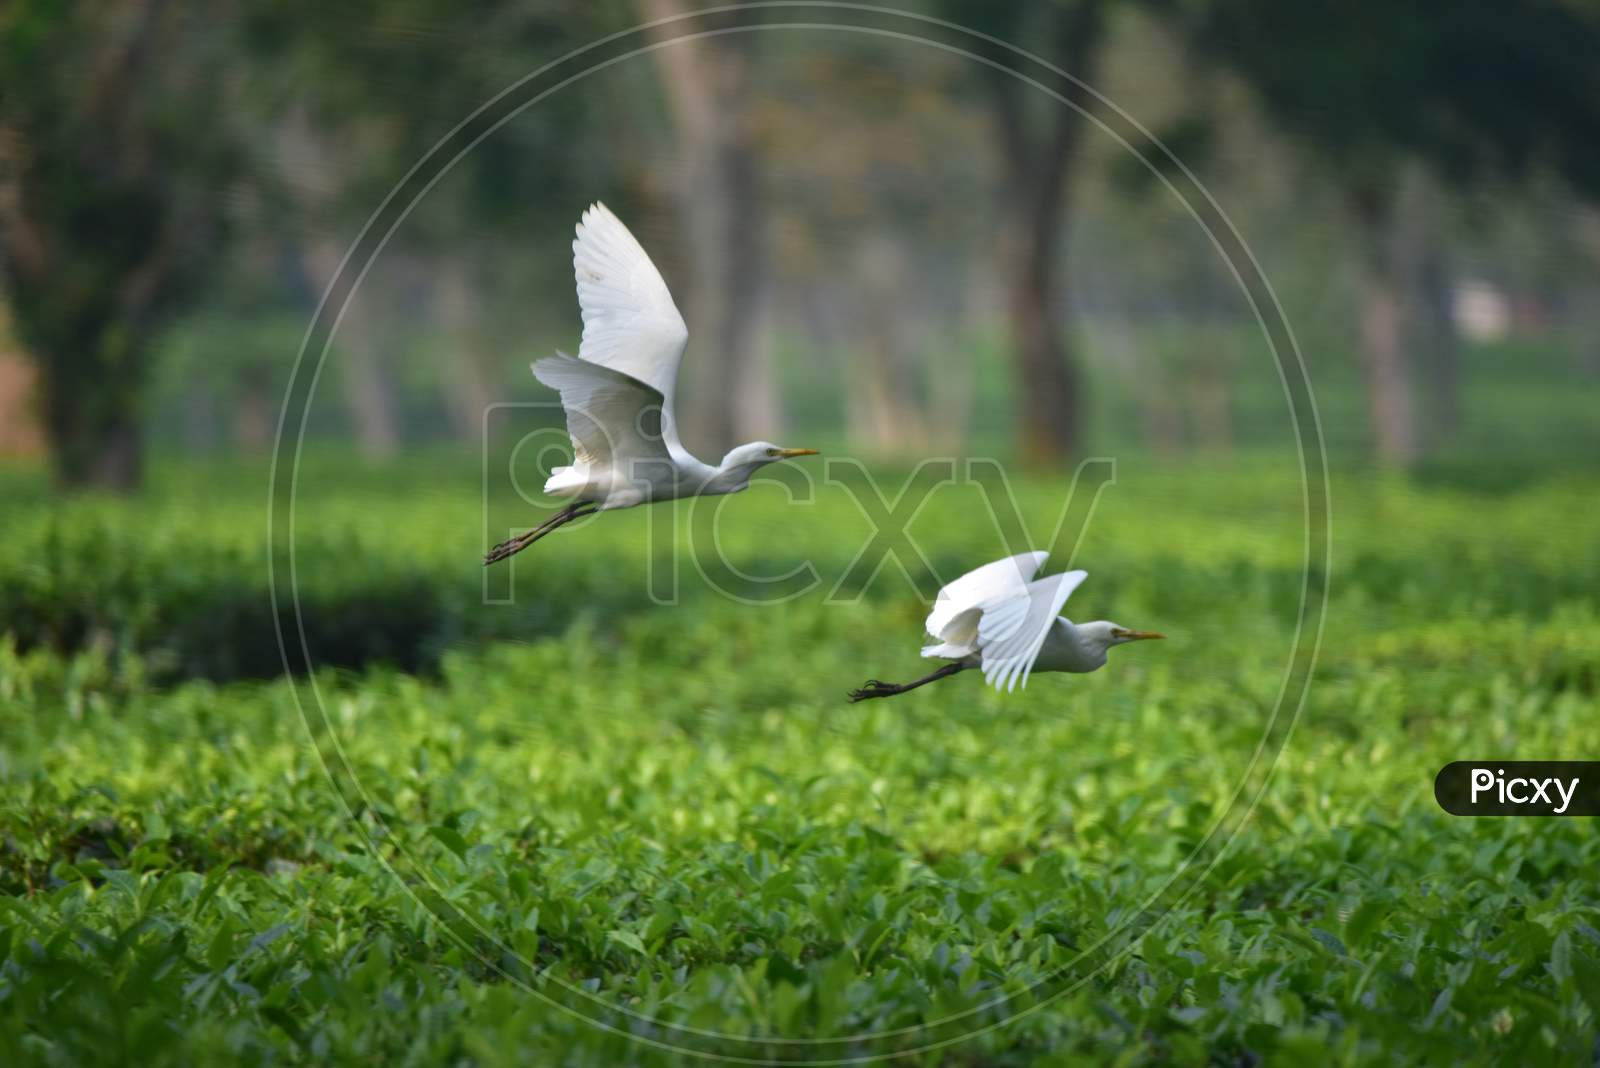 Egrets seen  flying  on a  tea garden   in  in Nagaon district, in the northeastern state of Assam on Nov 22,2020